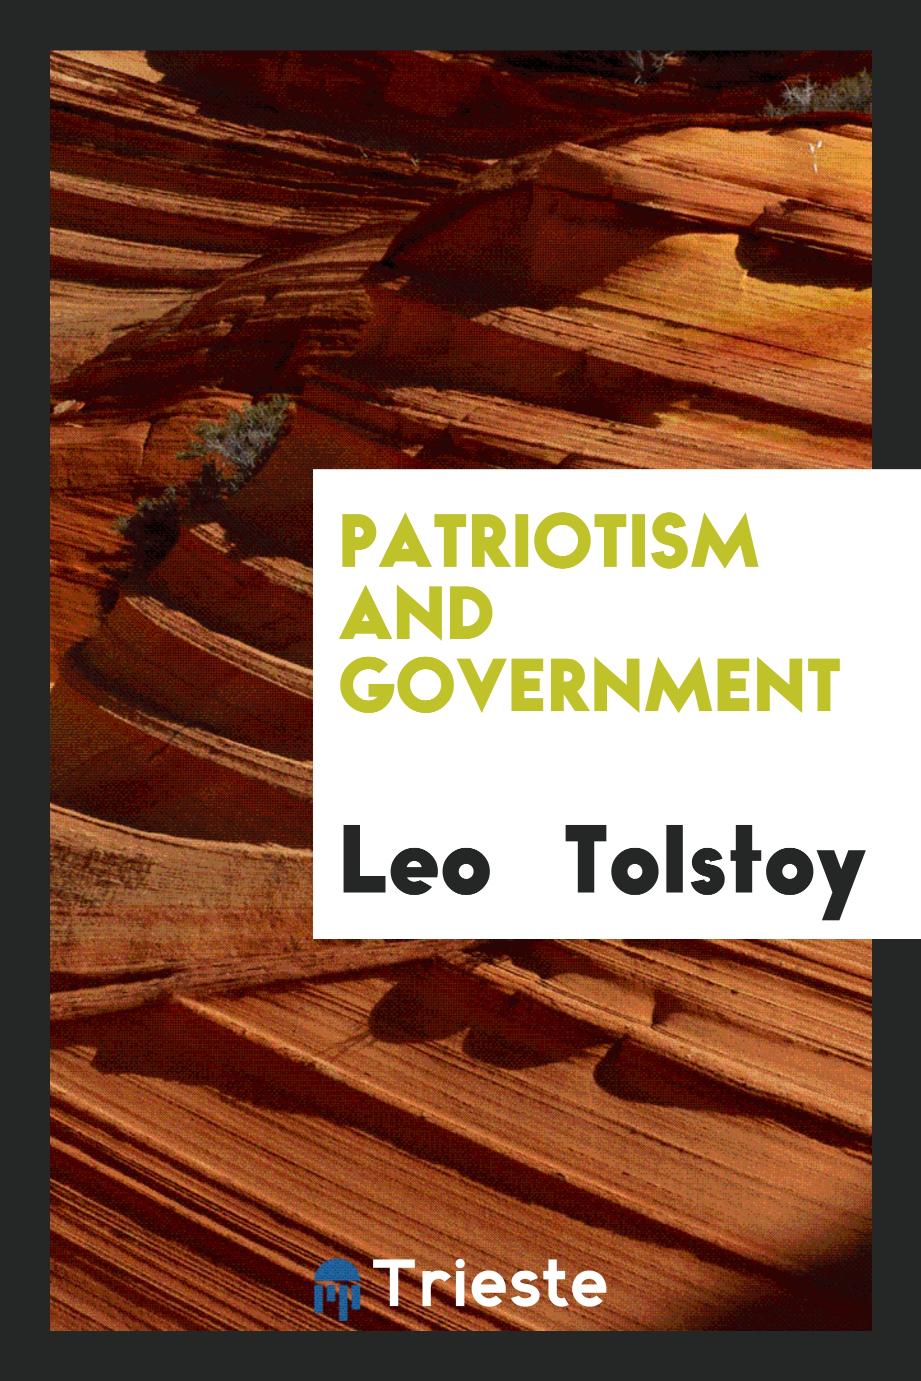 Patriotism and Government